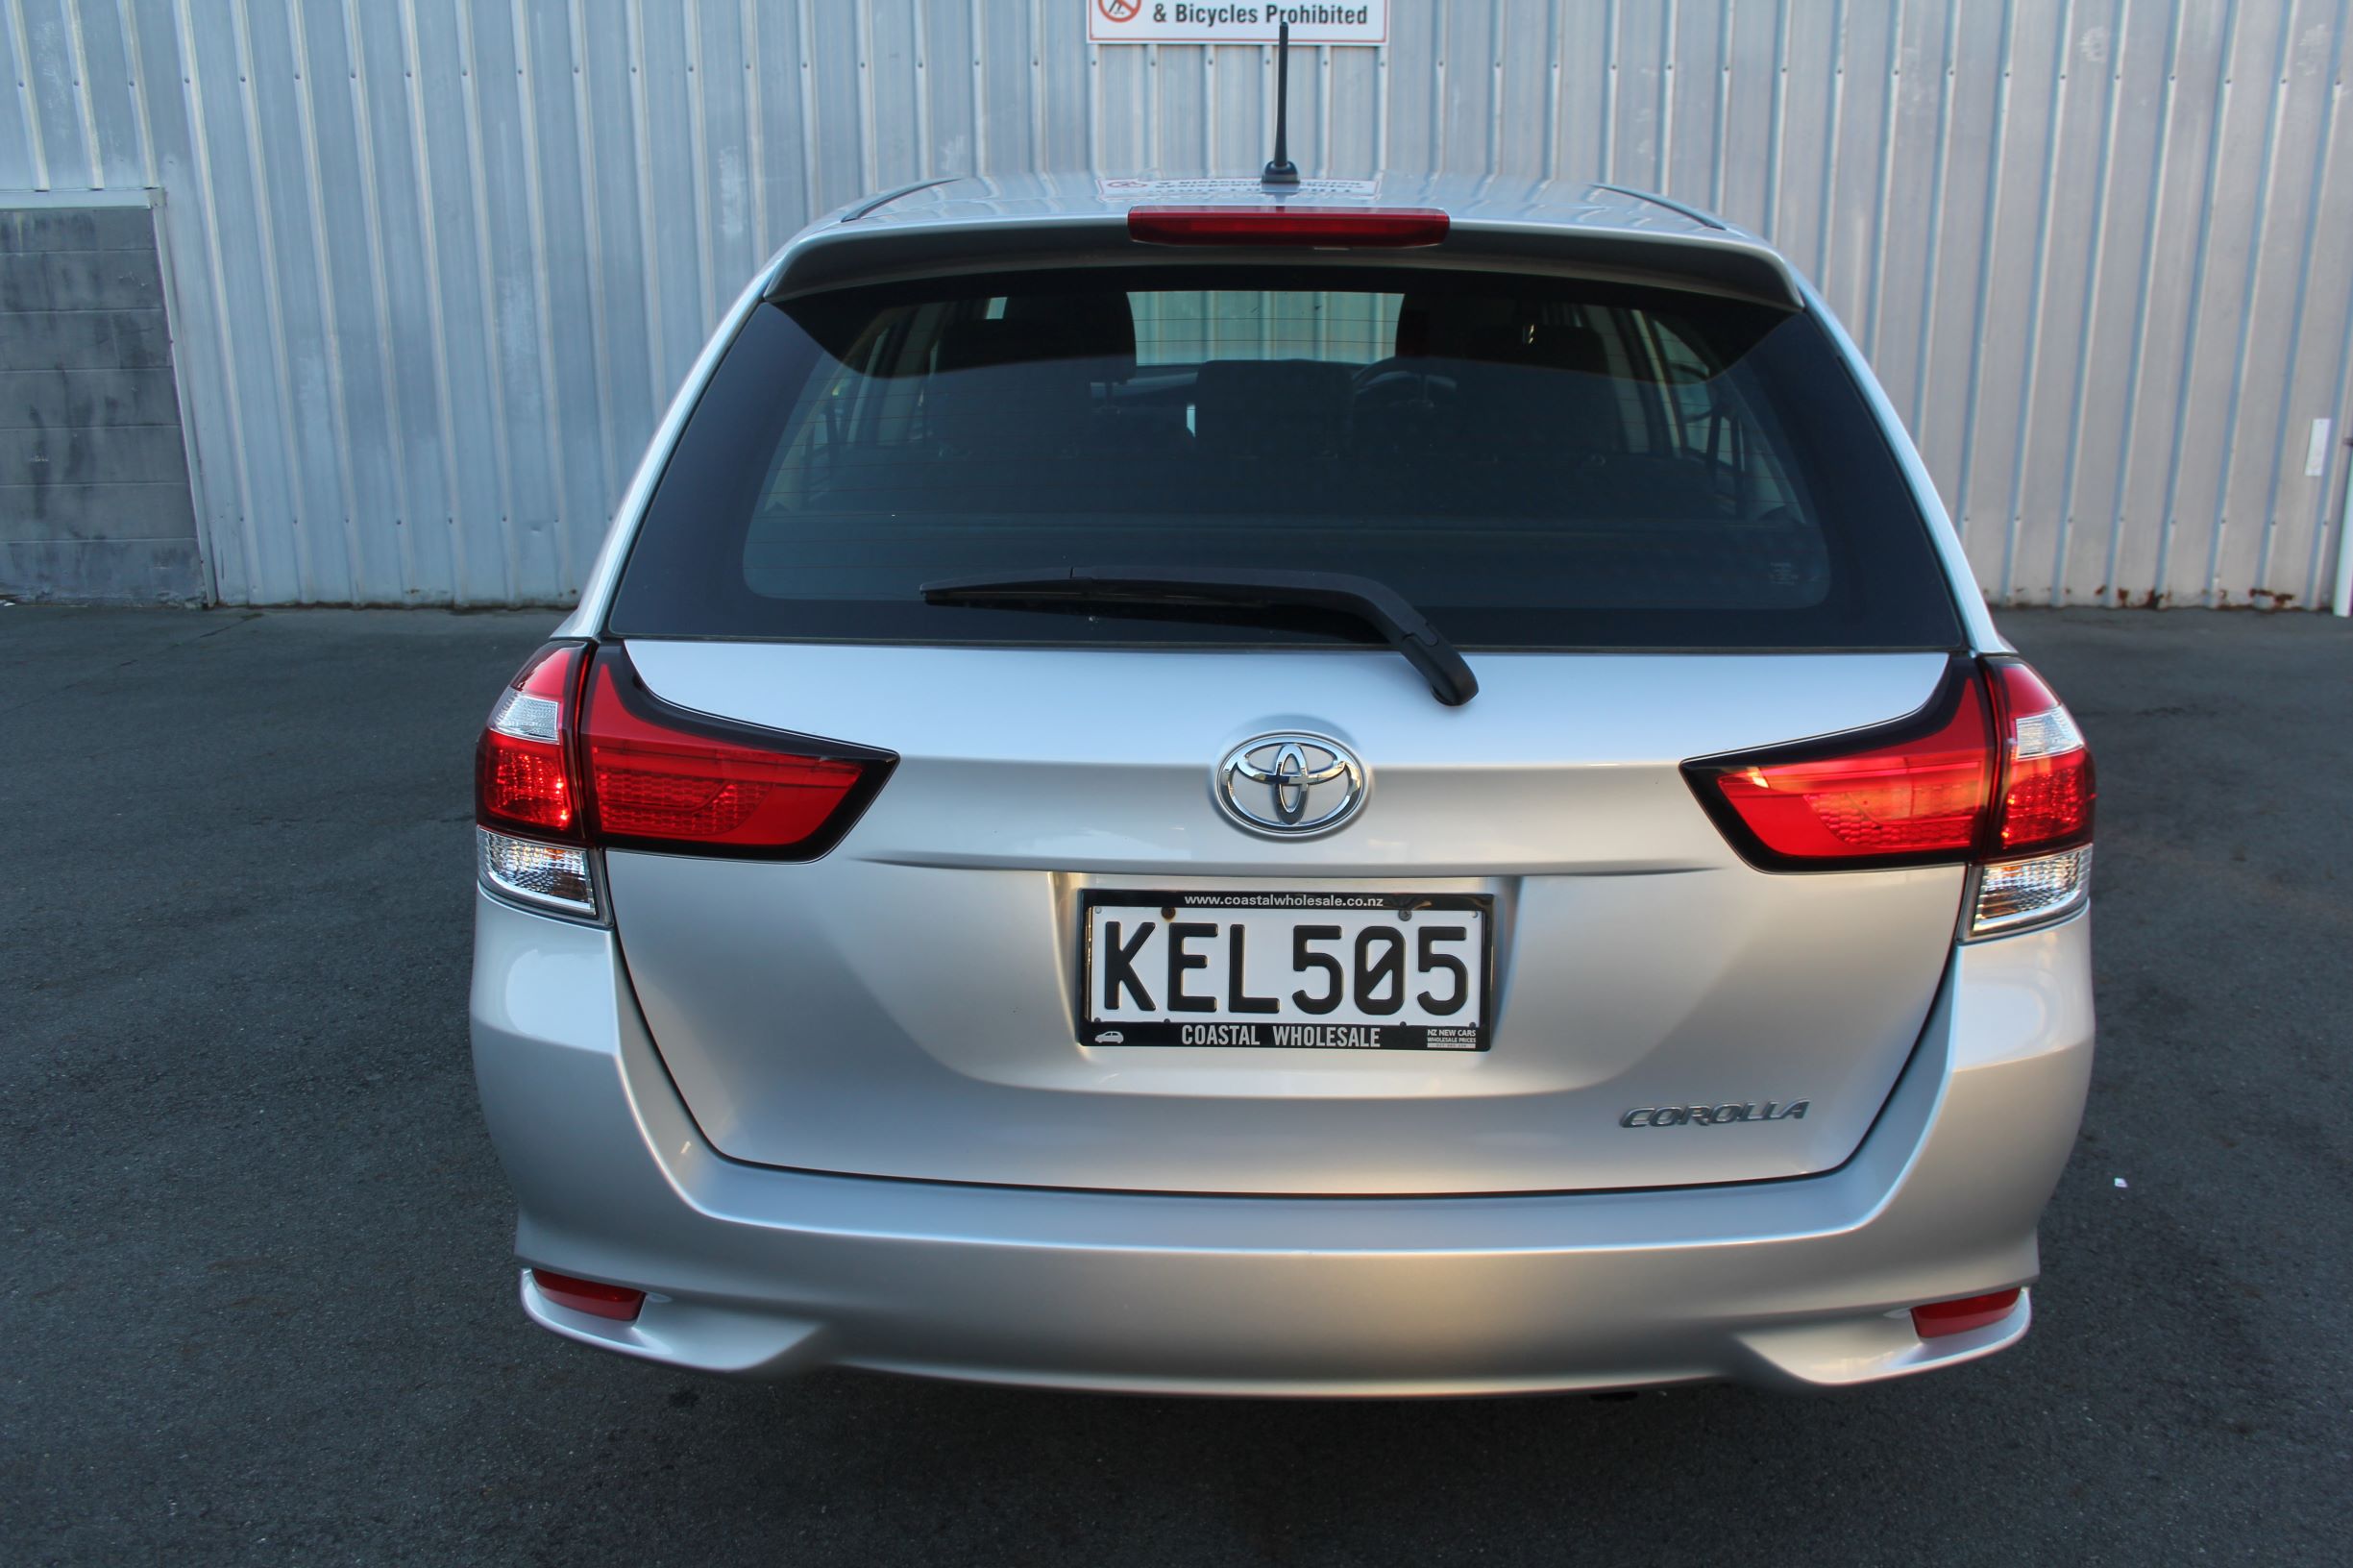 Toyota Corolla  2016 for sale in Auckland